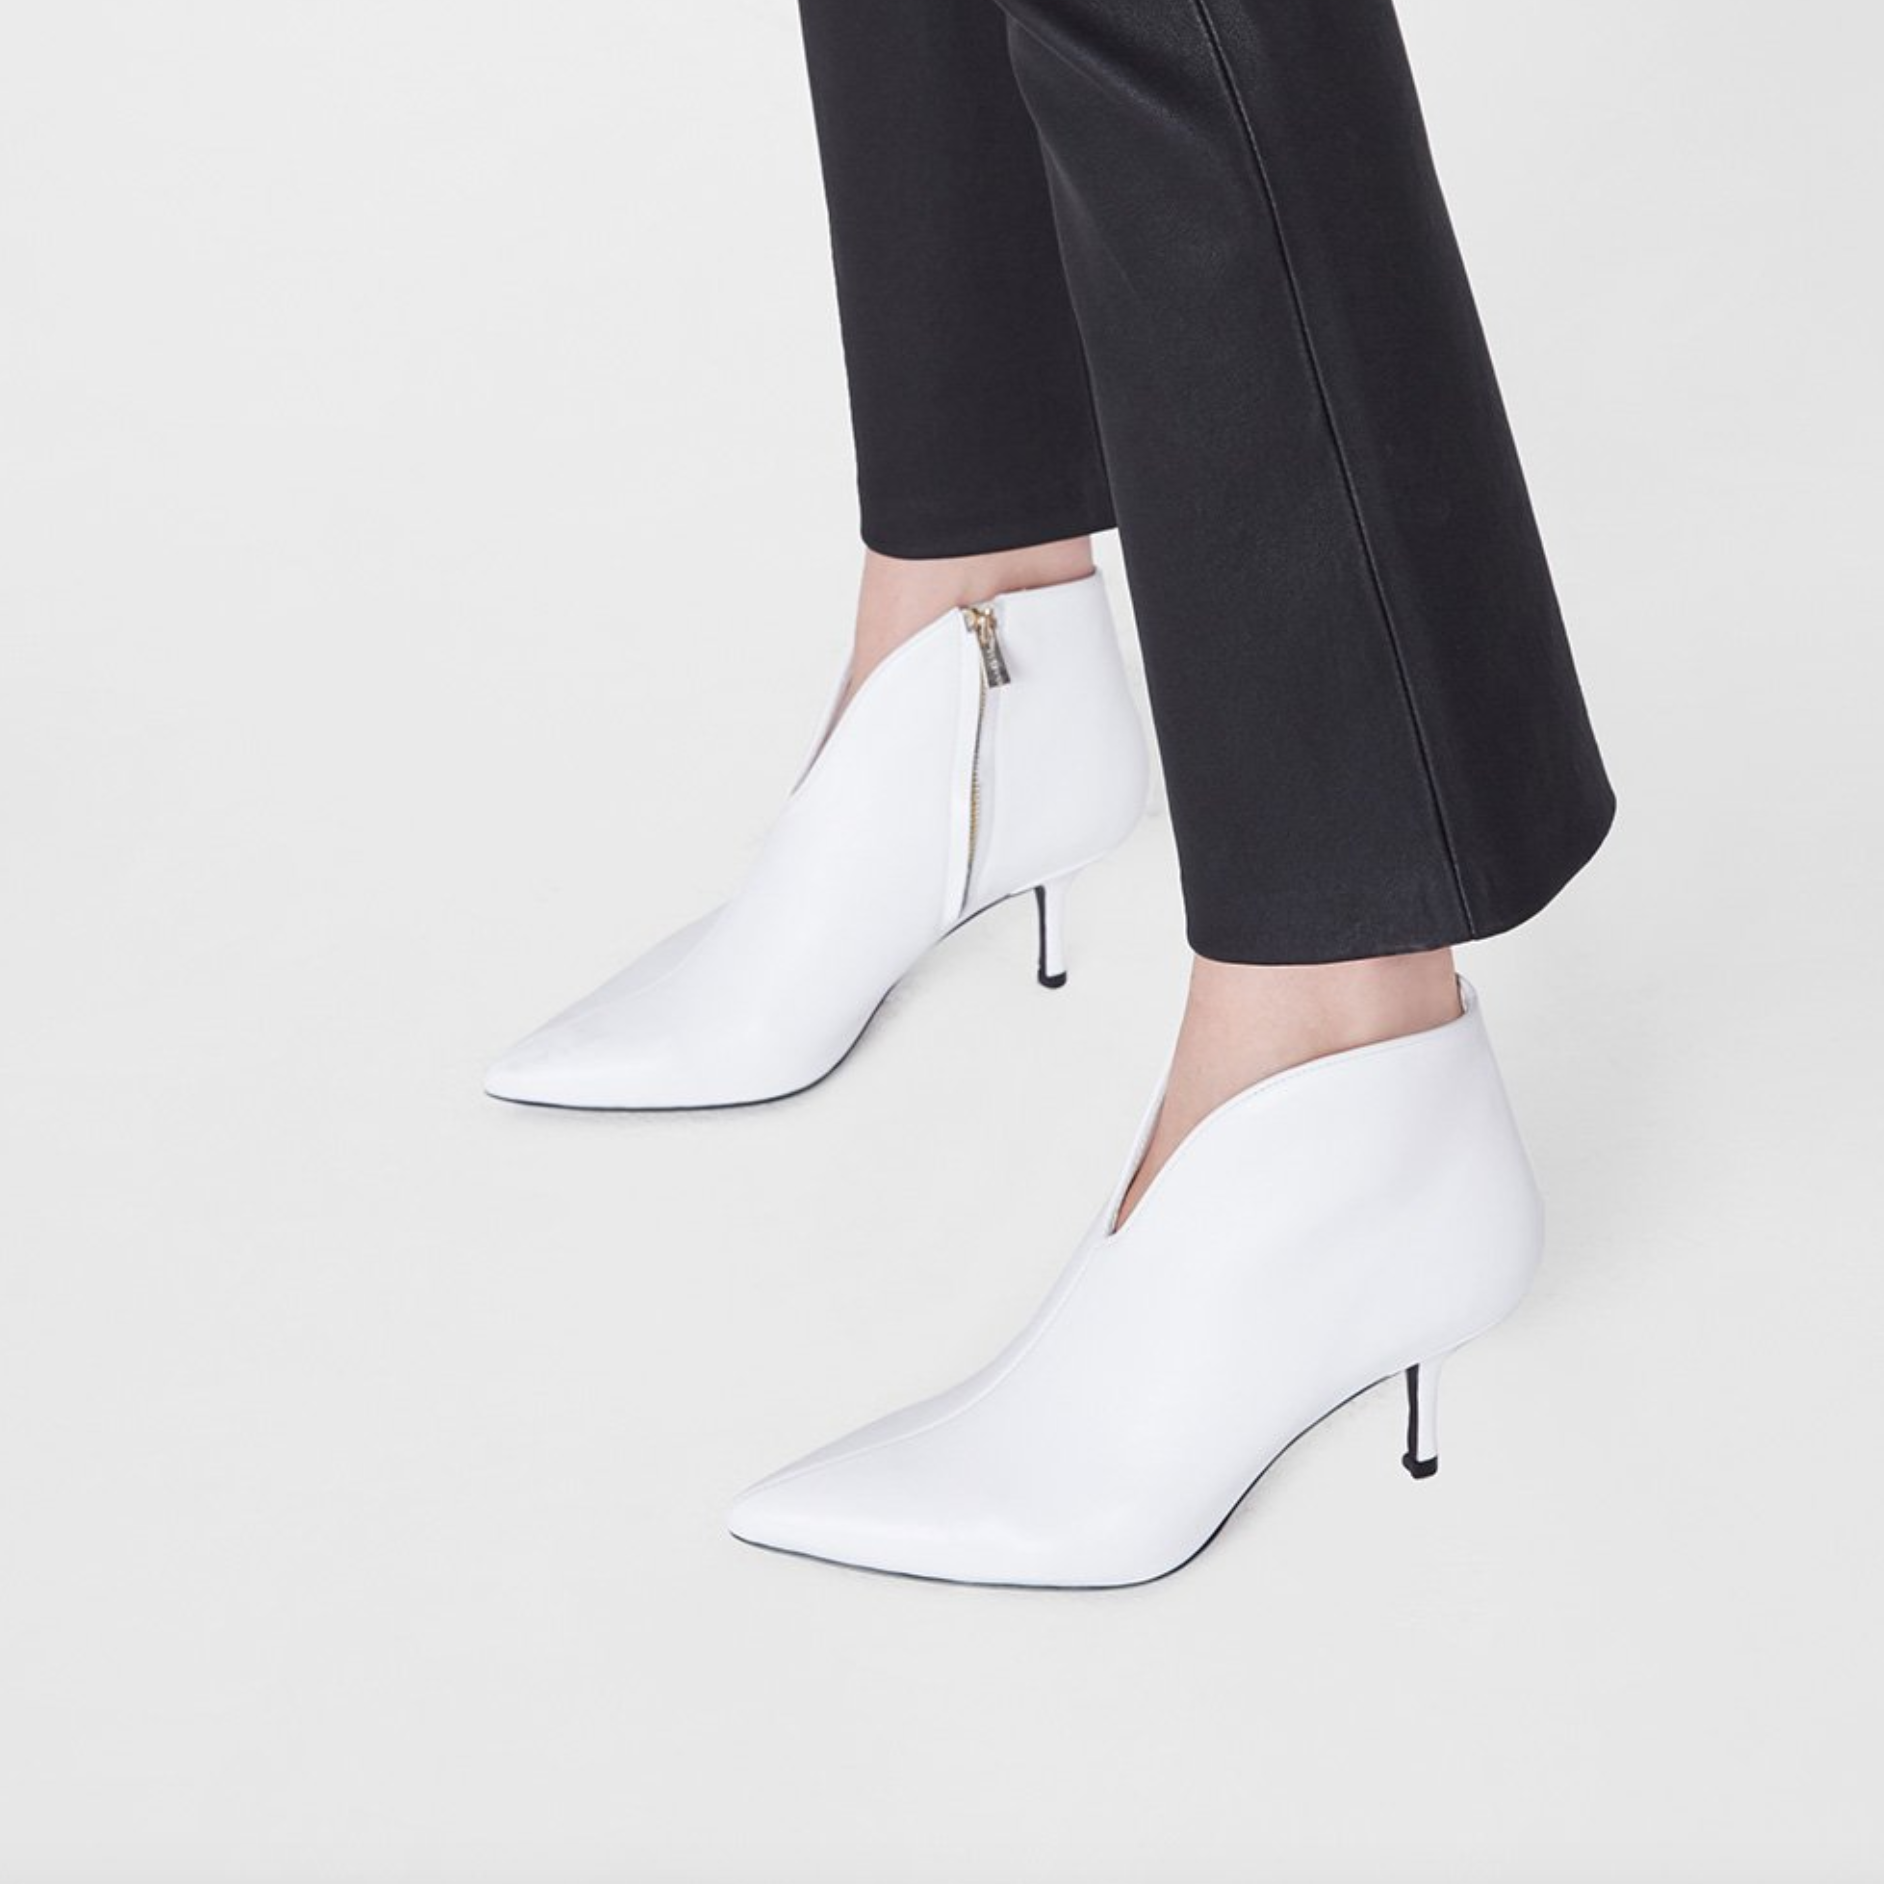 Buy Now: White Ankle Boots